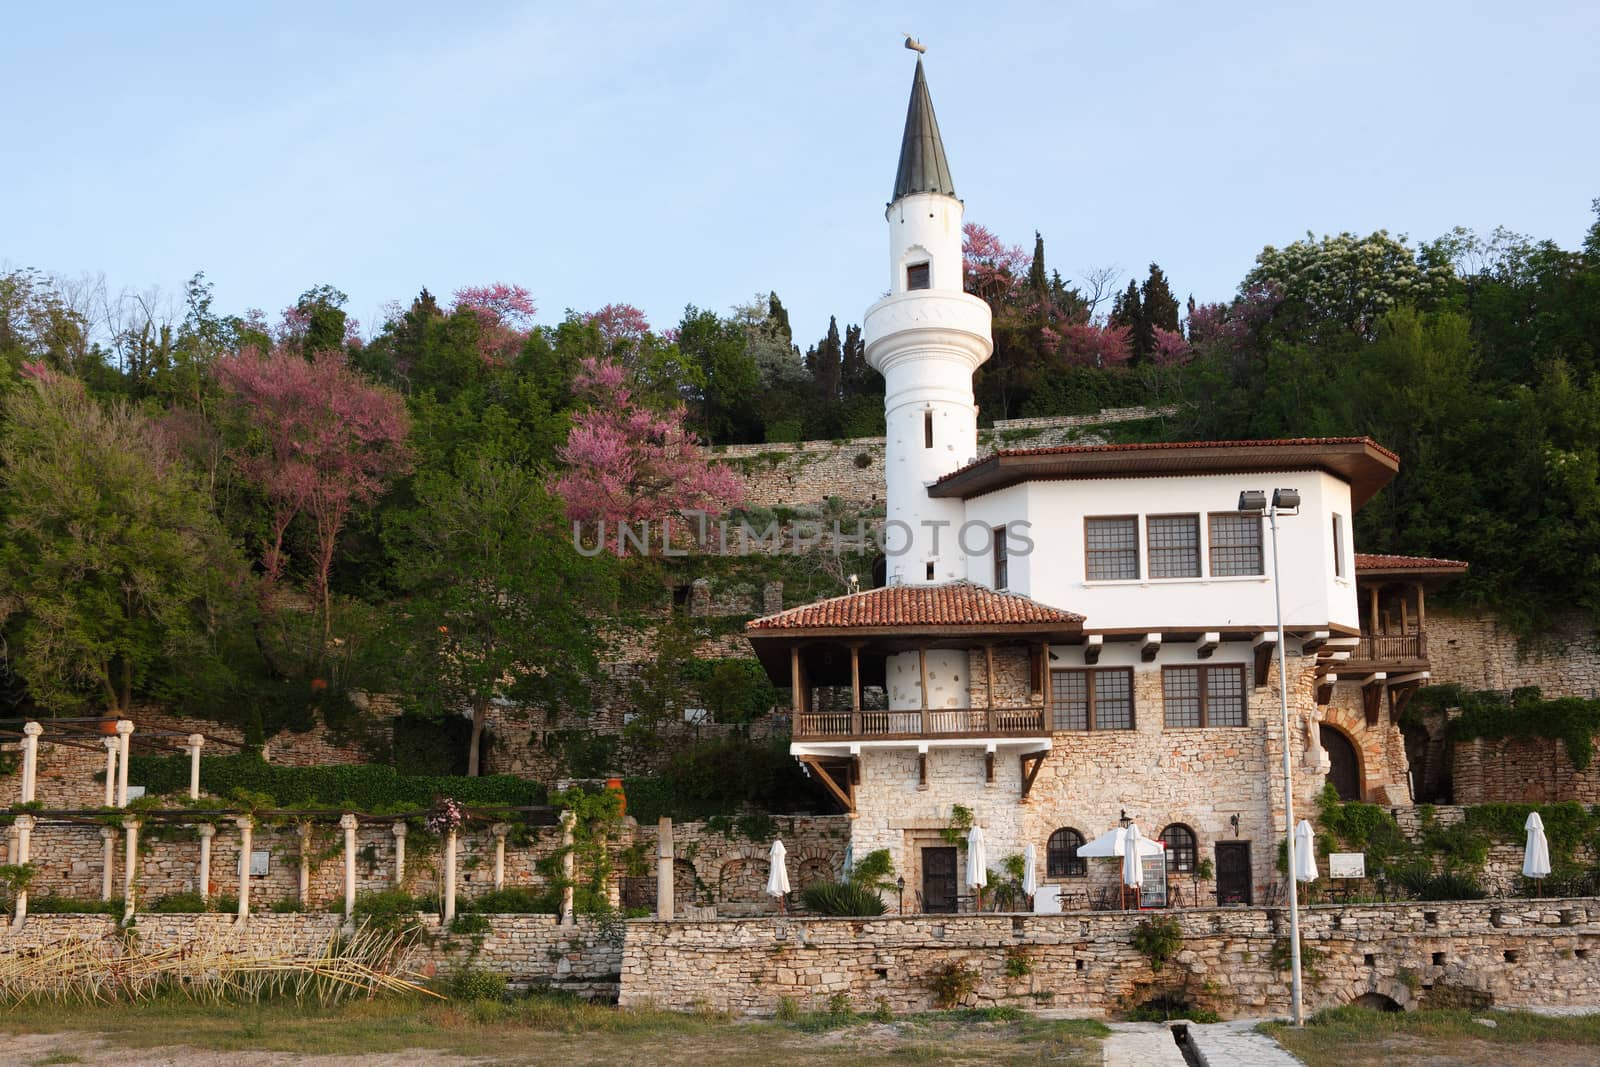 Balchik, the palace with the tower from East by ecobo